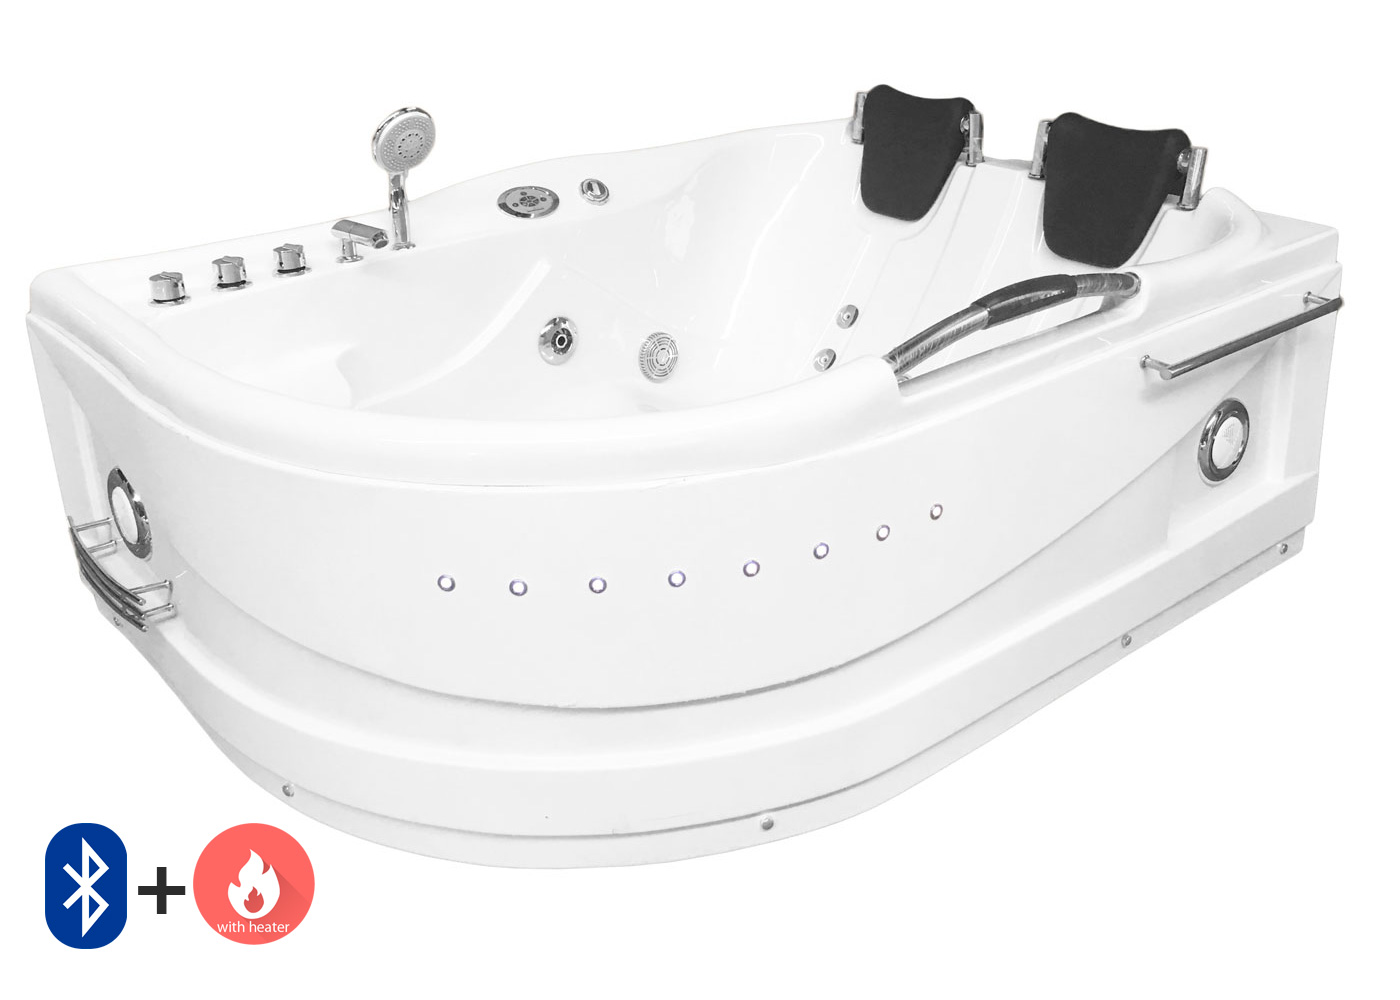 Hot Tub White 67 X 47 Double Pump With Heater And Bluetooth Maui